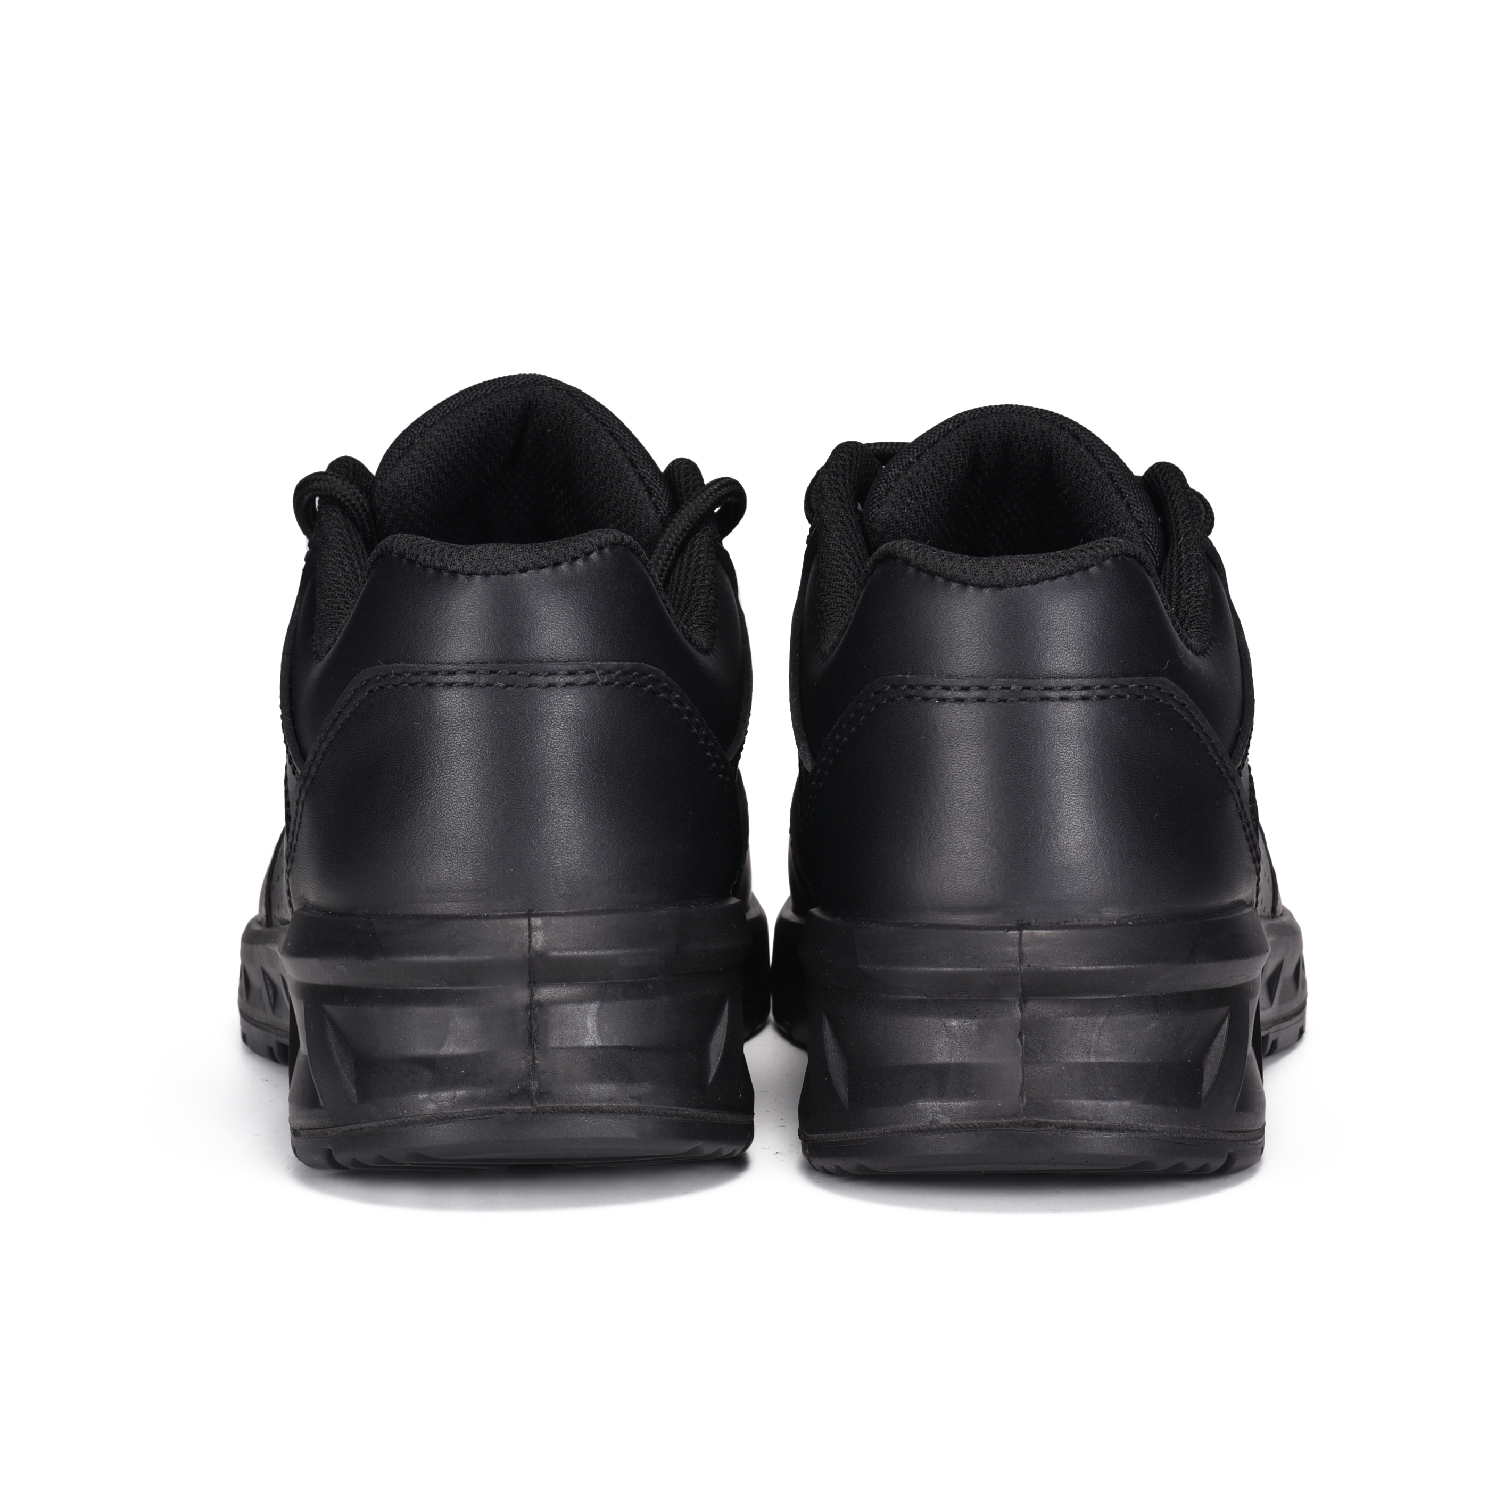 Light Weight Work Shoes for Engineer & Manager & Executive with Composite Toe L-7328 Engineer